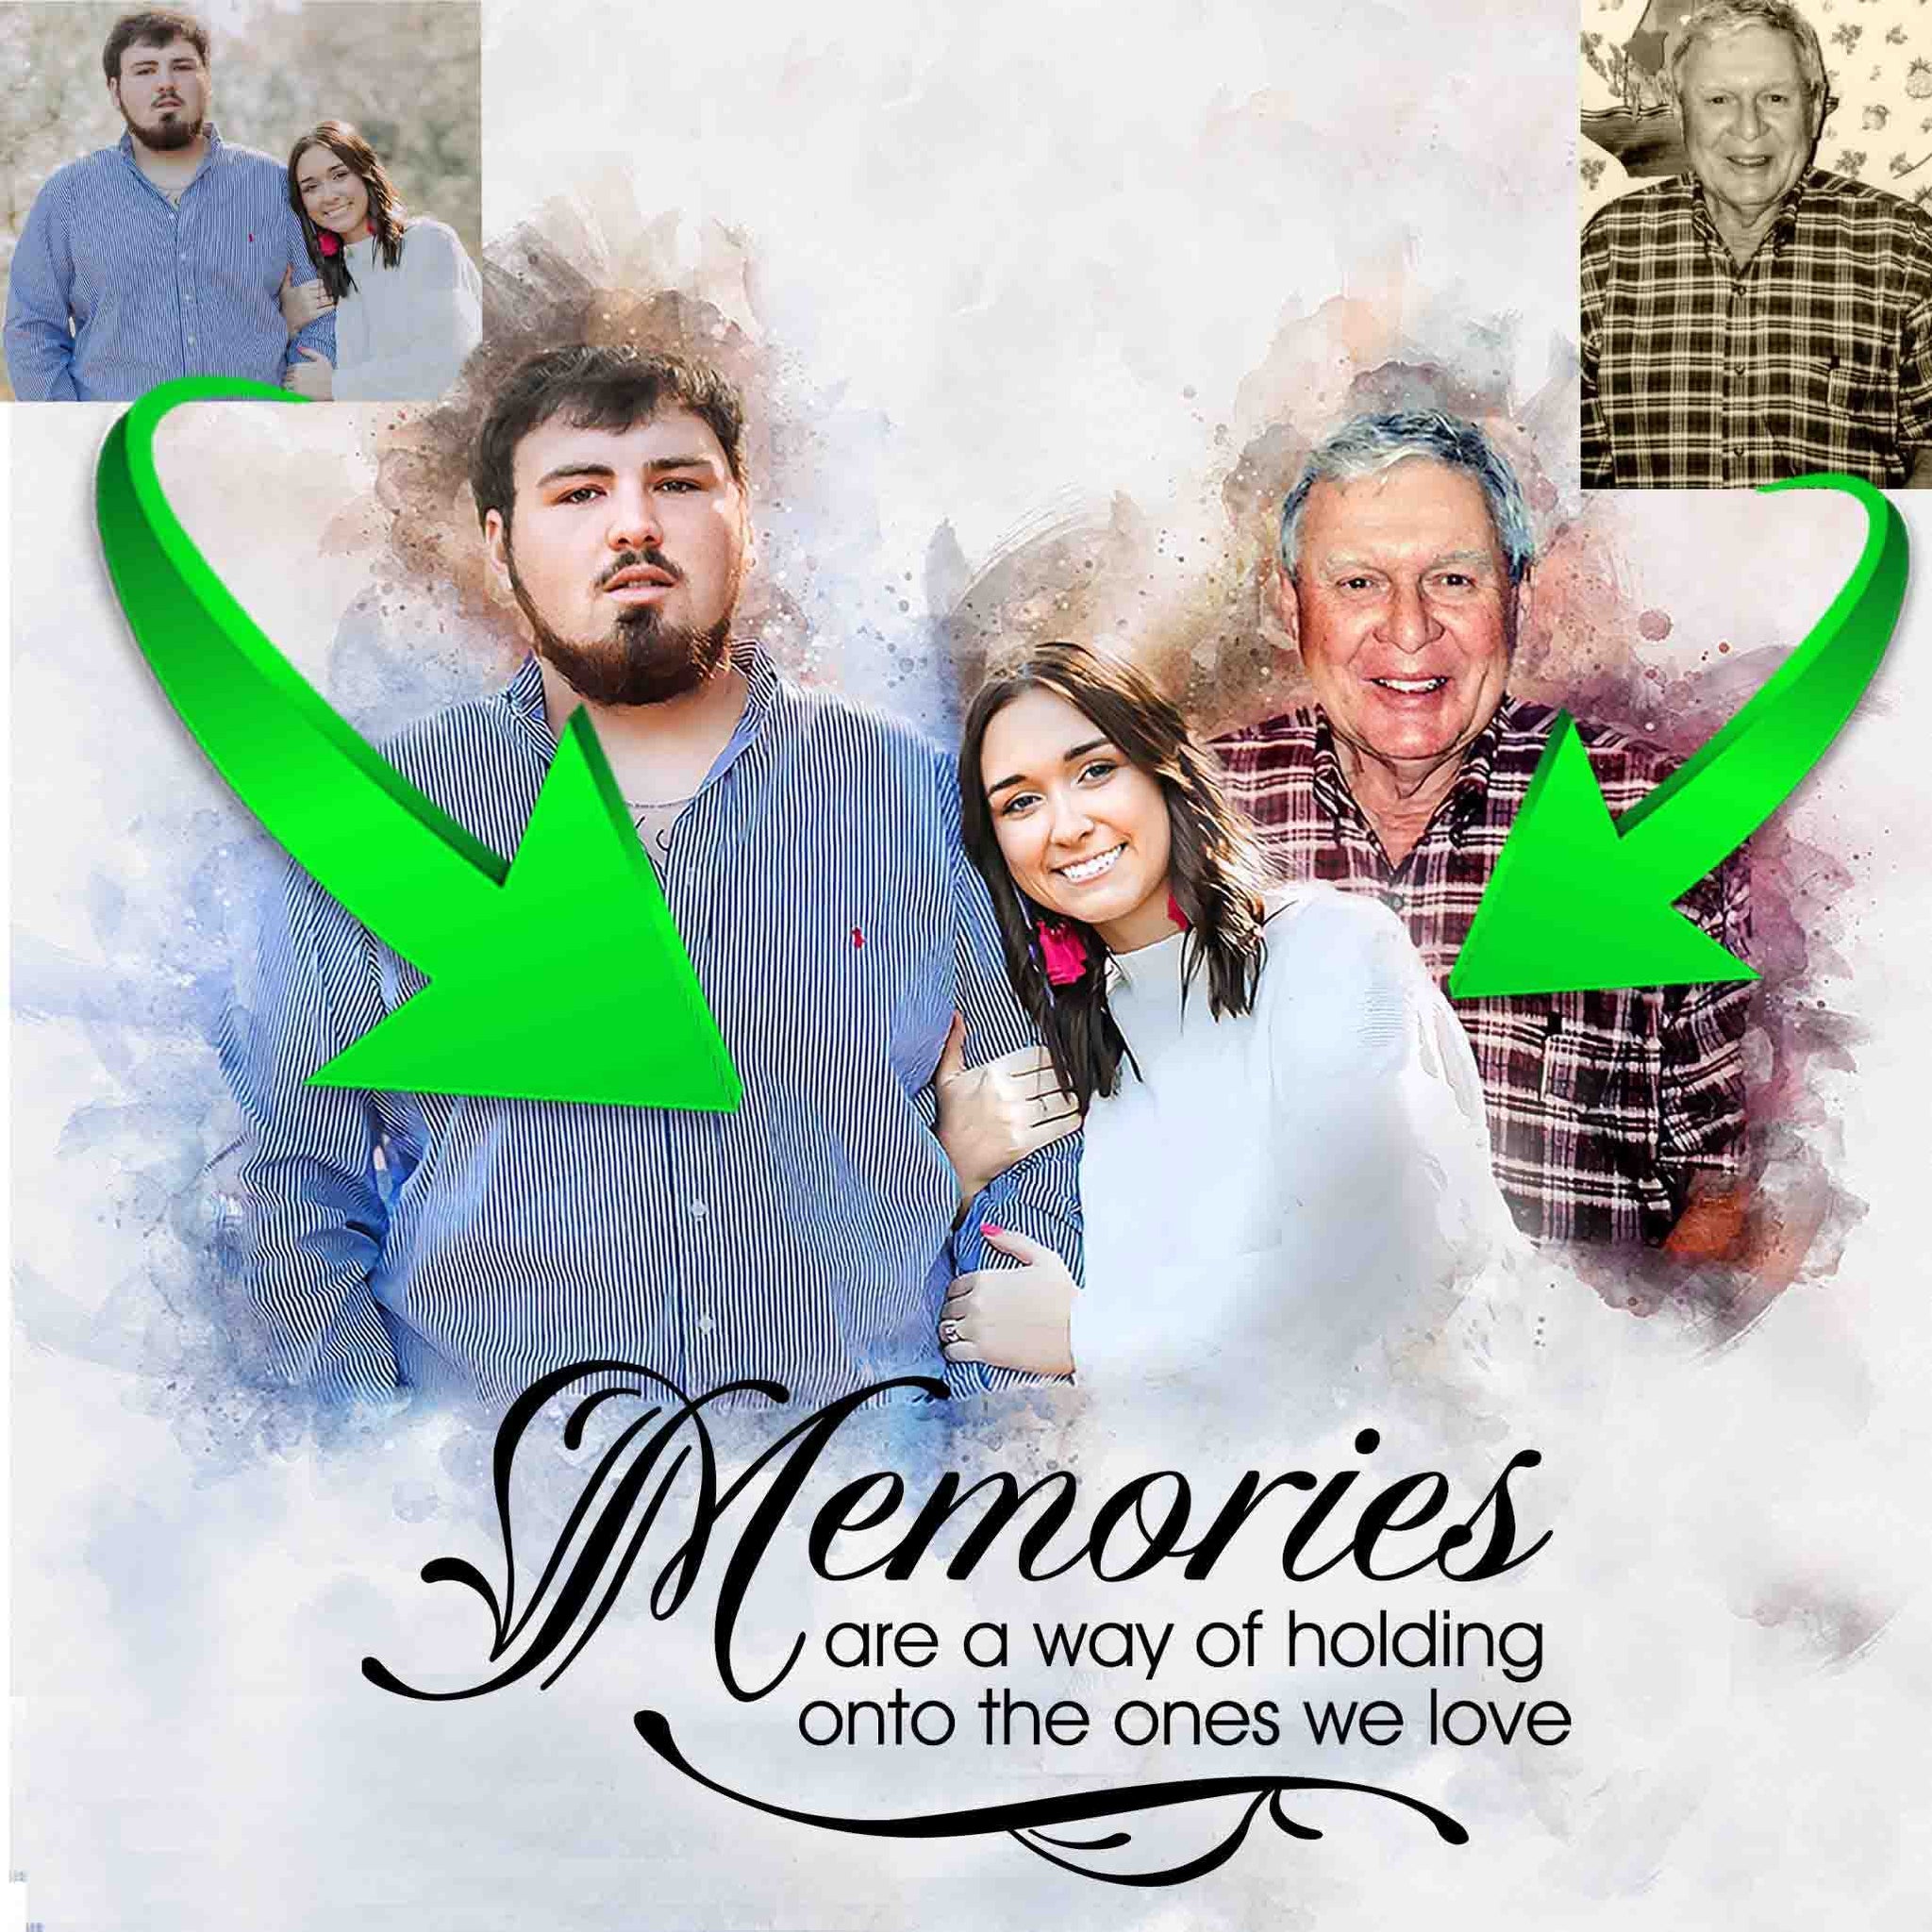 Add Lost Loved One in Family Pictures, Add Person to Photo, Add Someone into a Picture - FromPicToArt